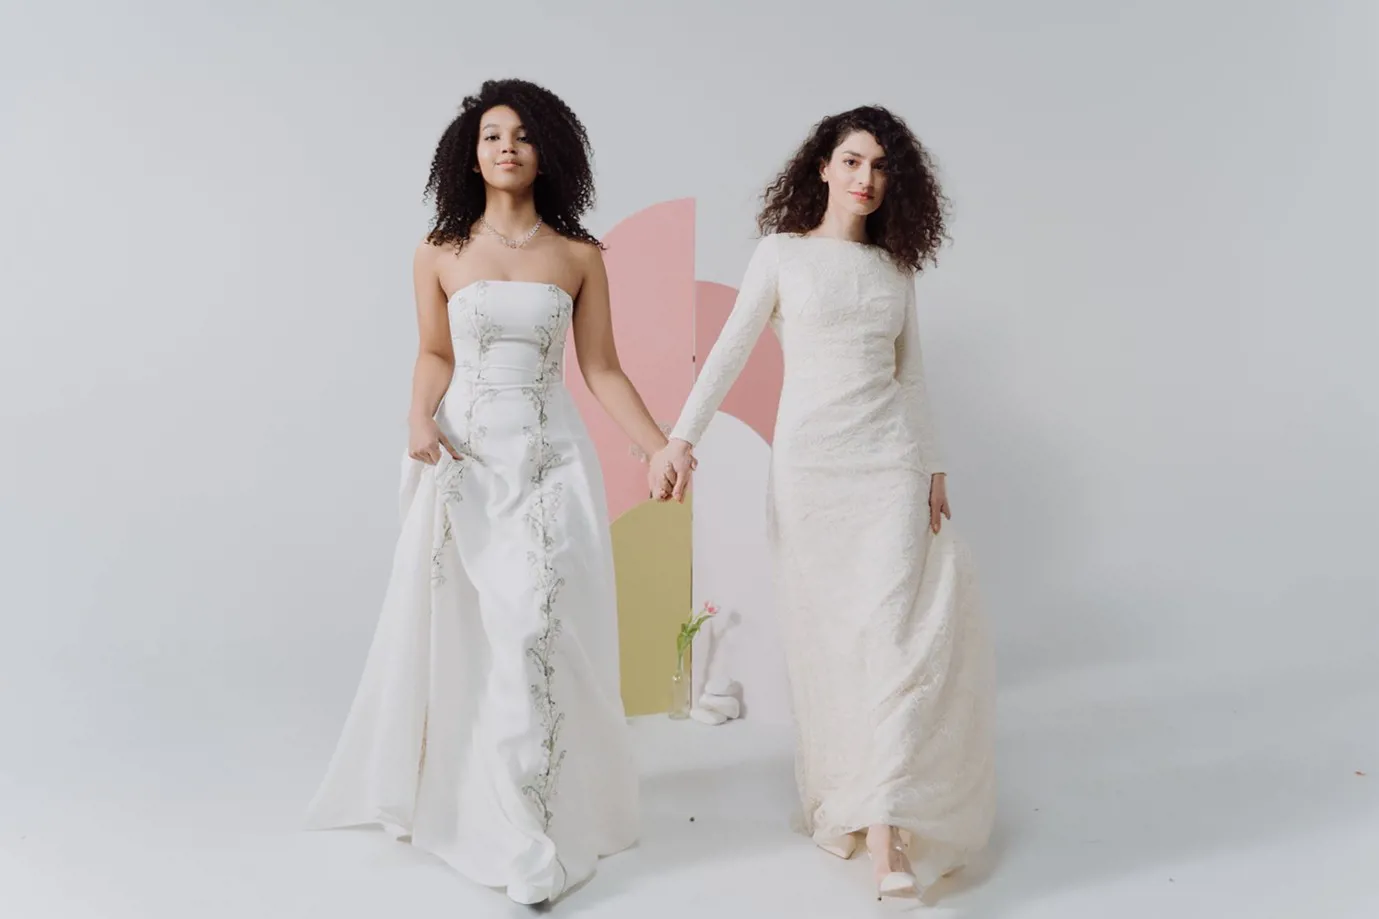 two women in wedding dresses holding hands